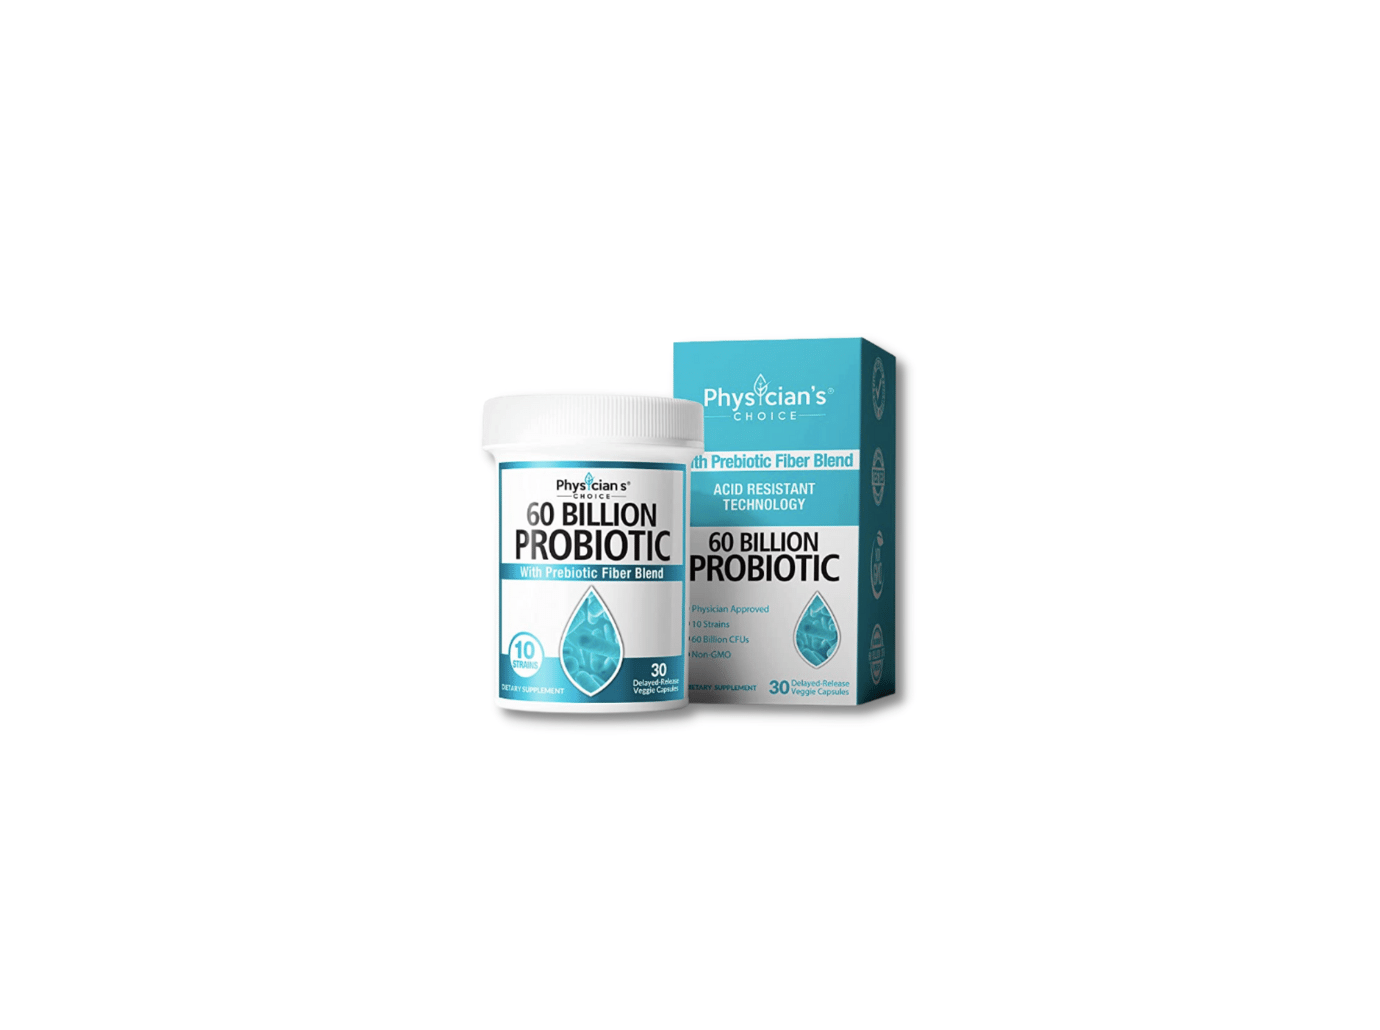 Physician’s CHOICE Probiotic Supplements